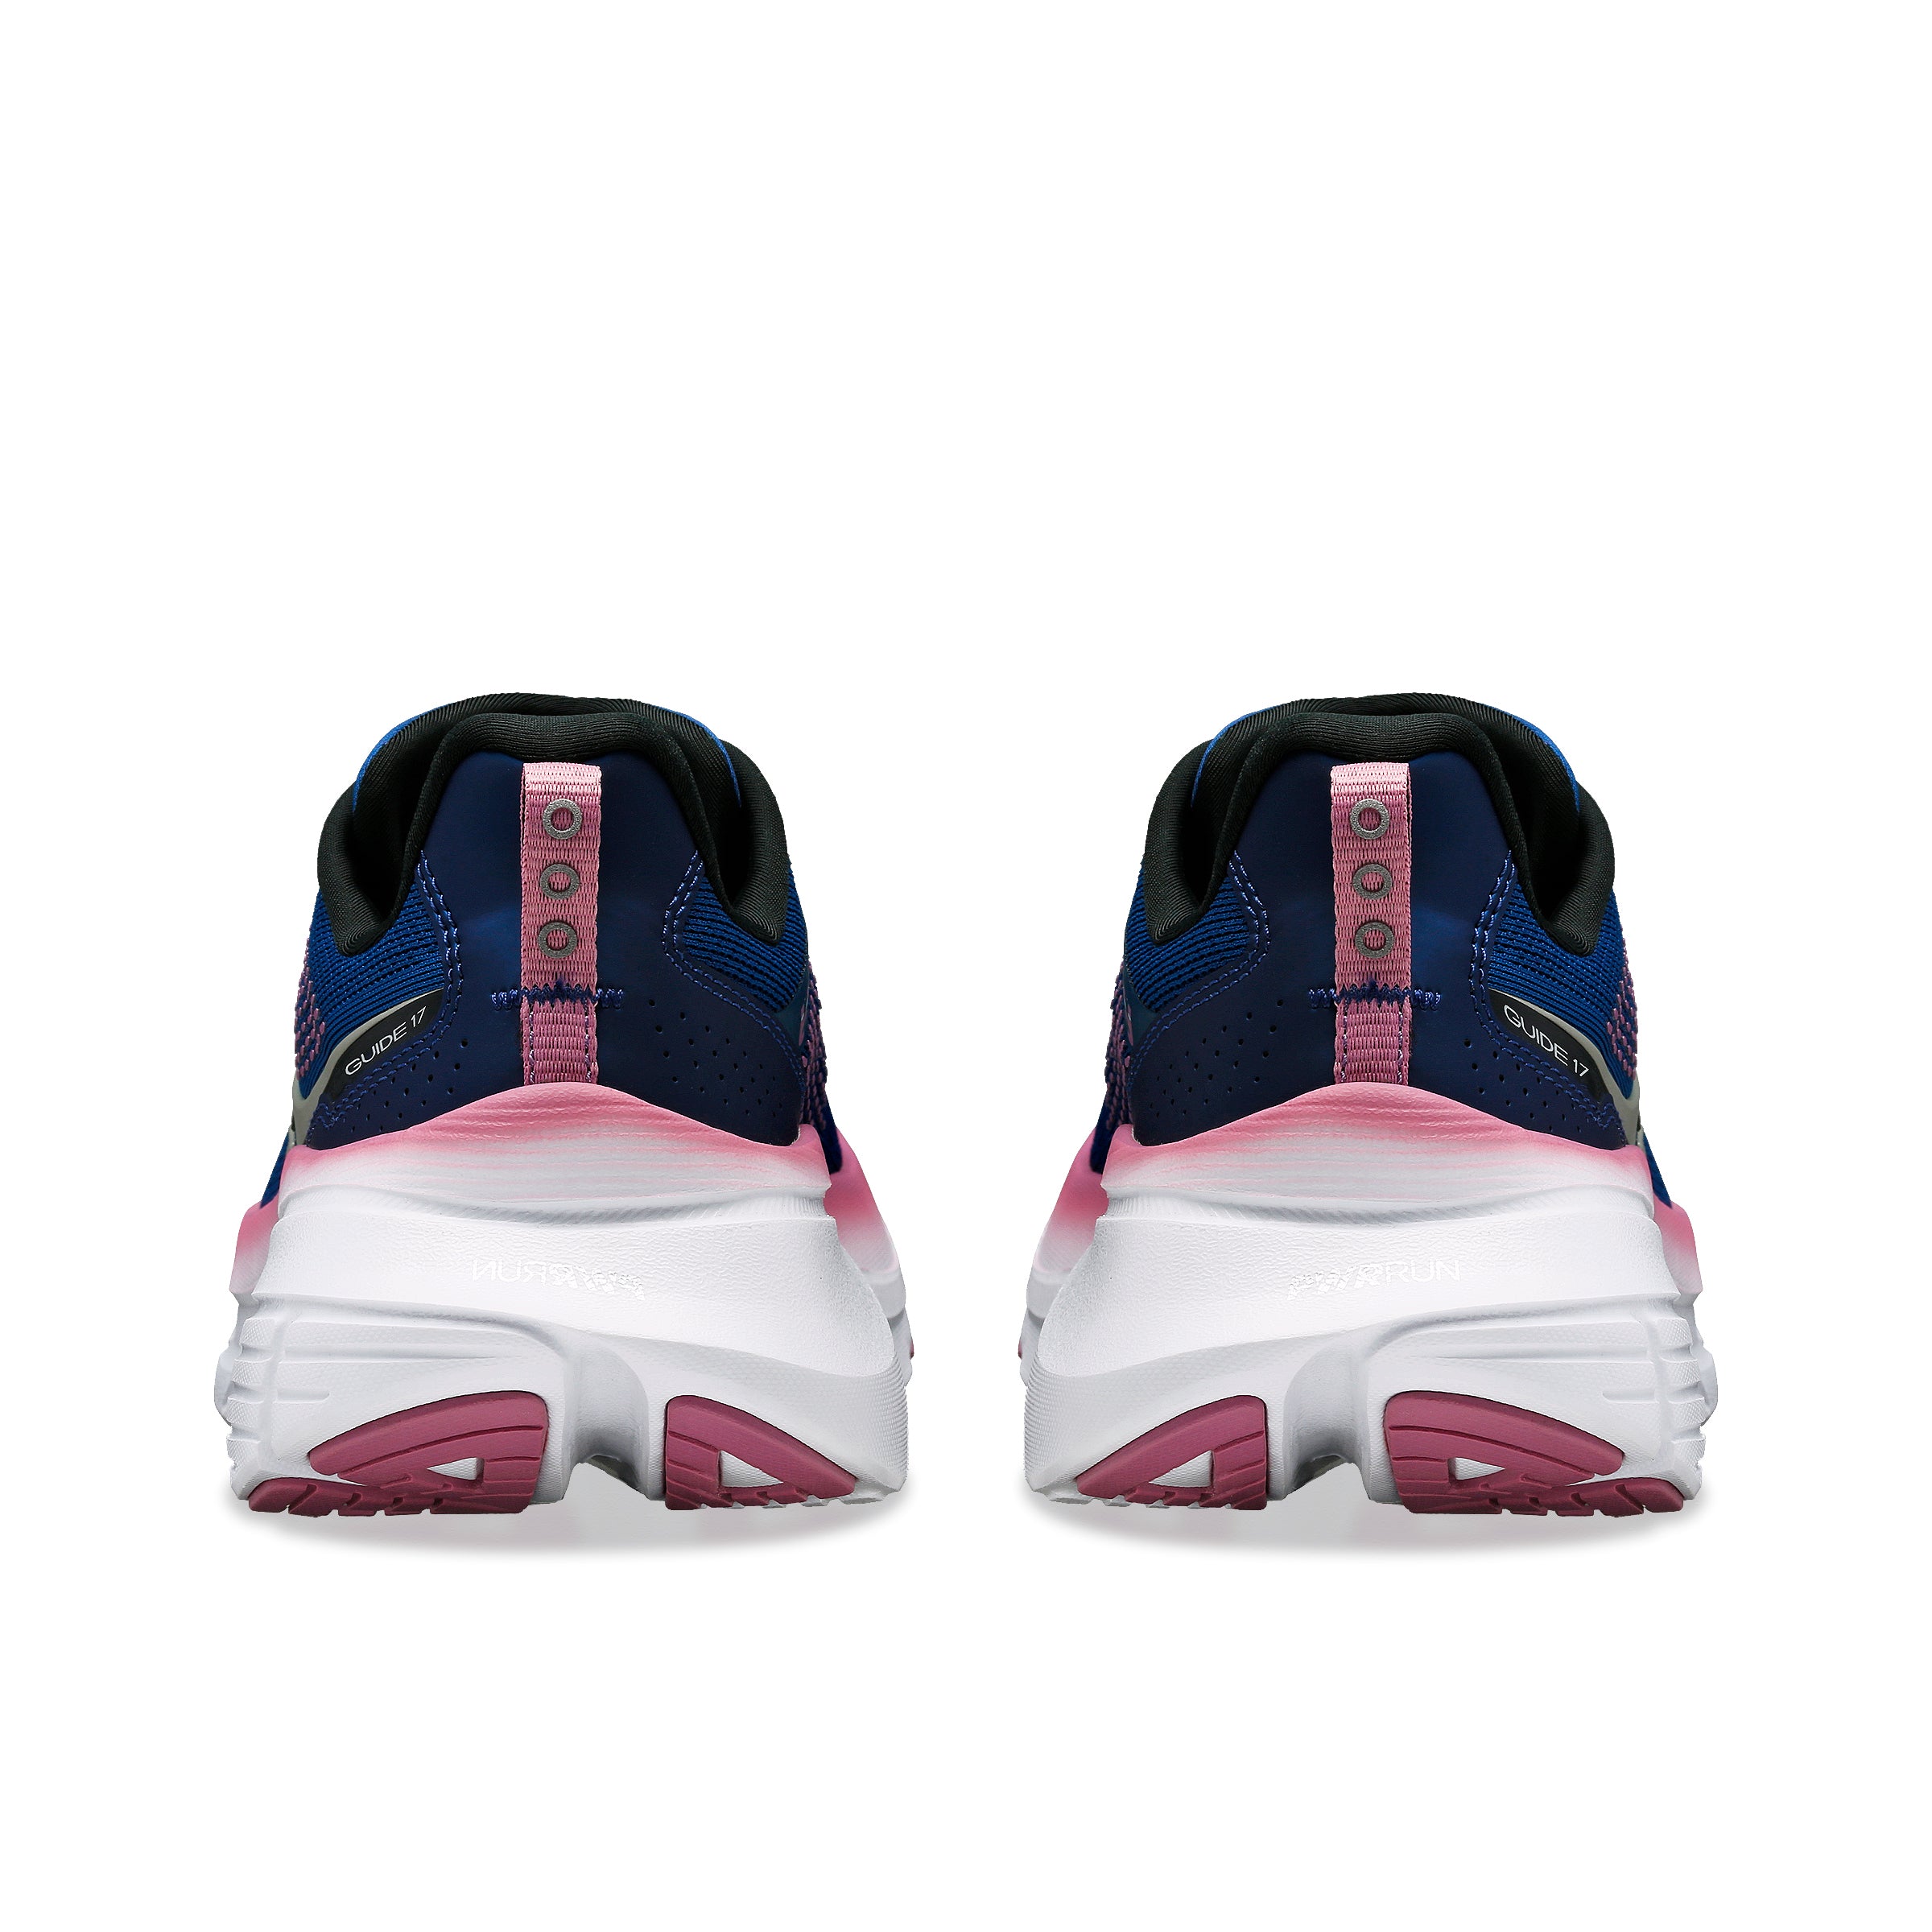 SAUCONY WOMEN'S GUIDE 17 - B - 106 NAVY/ORCHID 